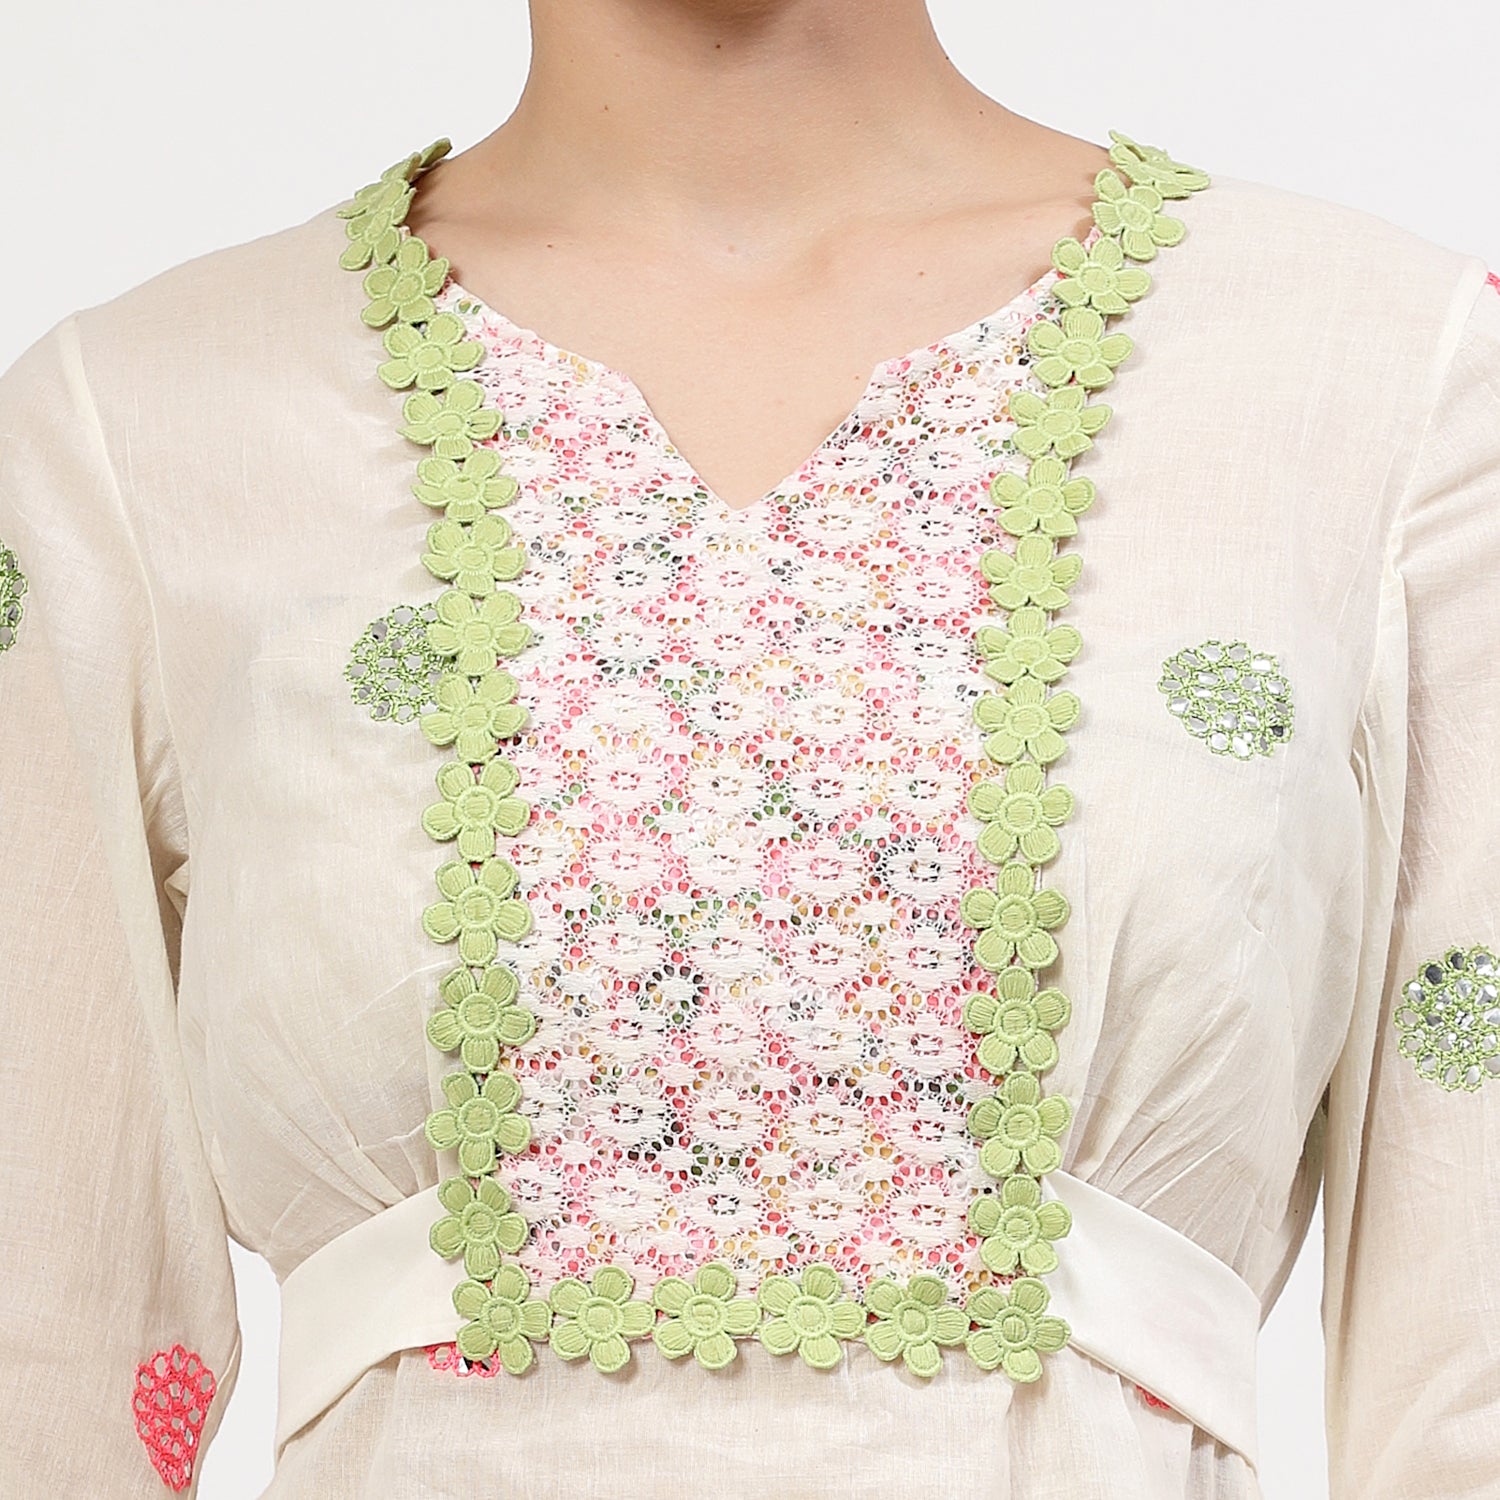 Off White Cotton Mirror Embroidery Top With Flower Net Lace At Yoke